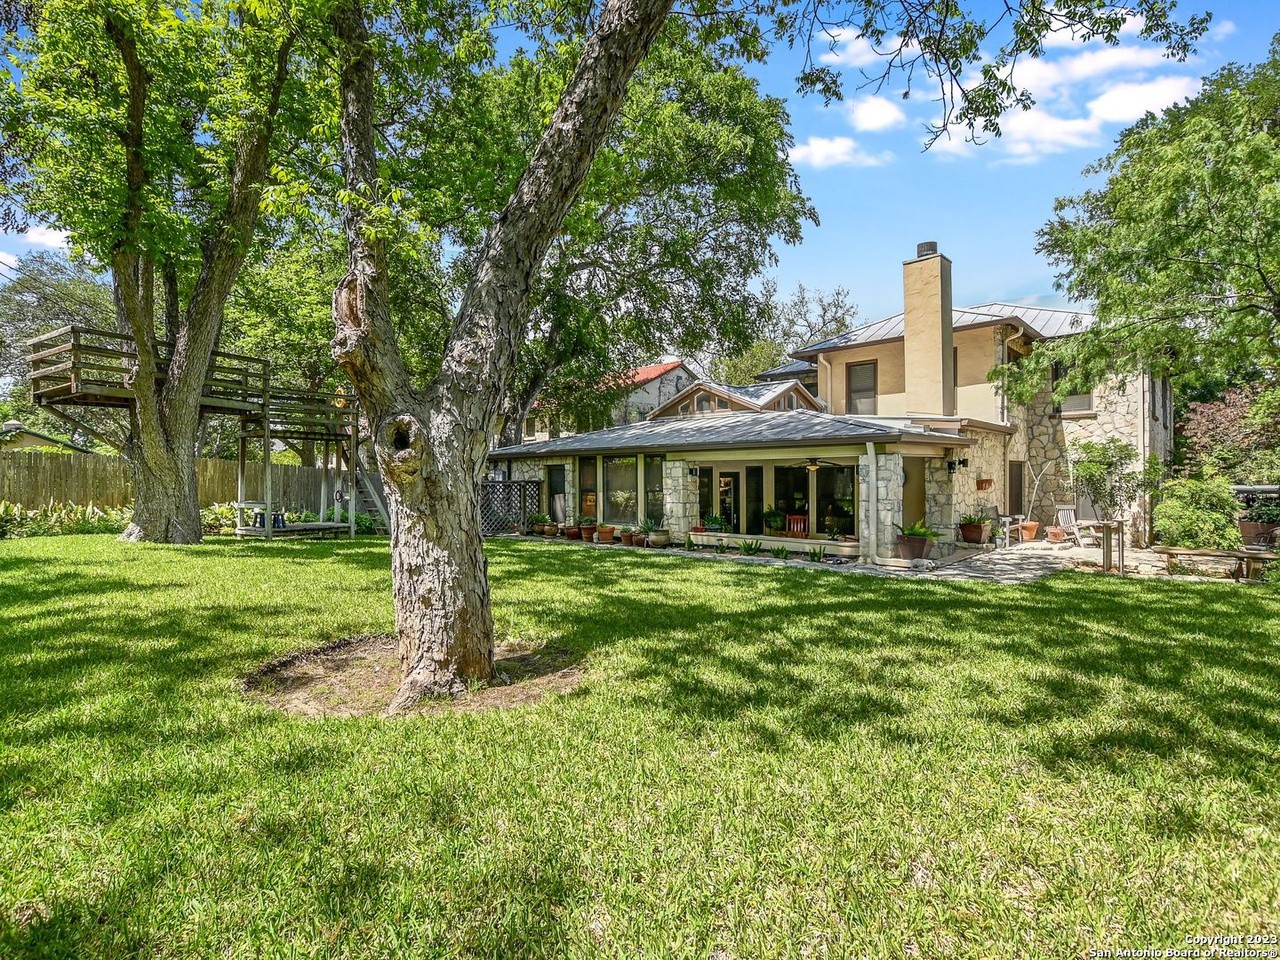 A 1938 stone home built by San Antonio real-estate mogul H.C. Thorman is now for sale